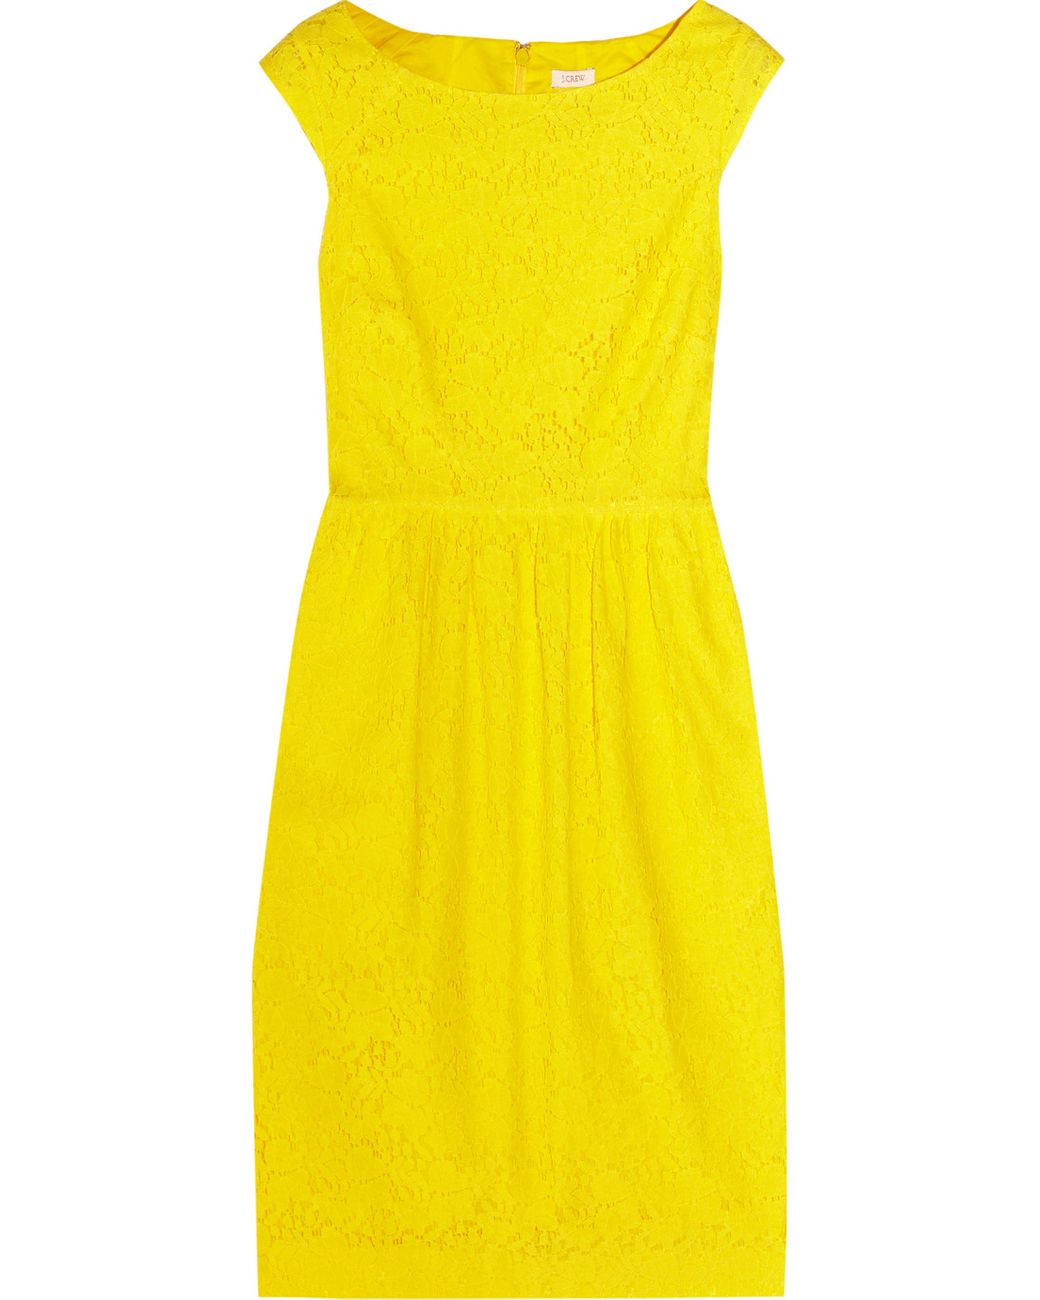 J.Crew Lucille Cotton blend Lace Dress in Yellow | Lyst